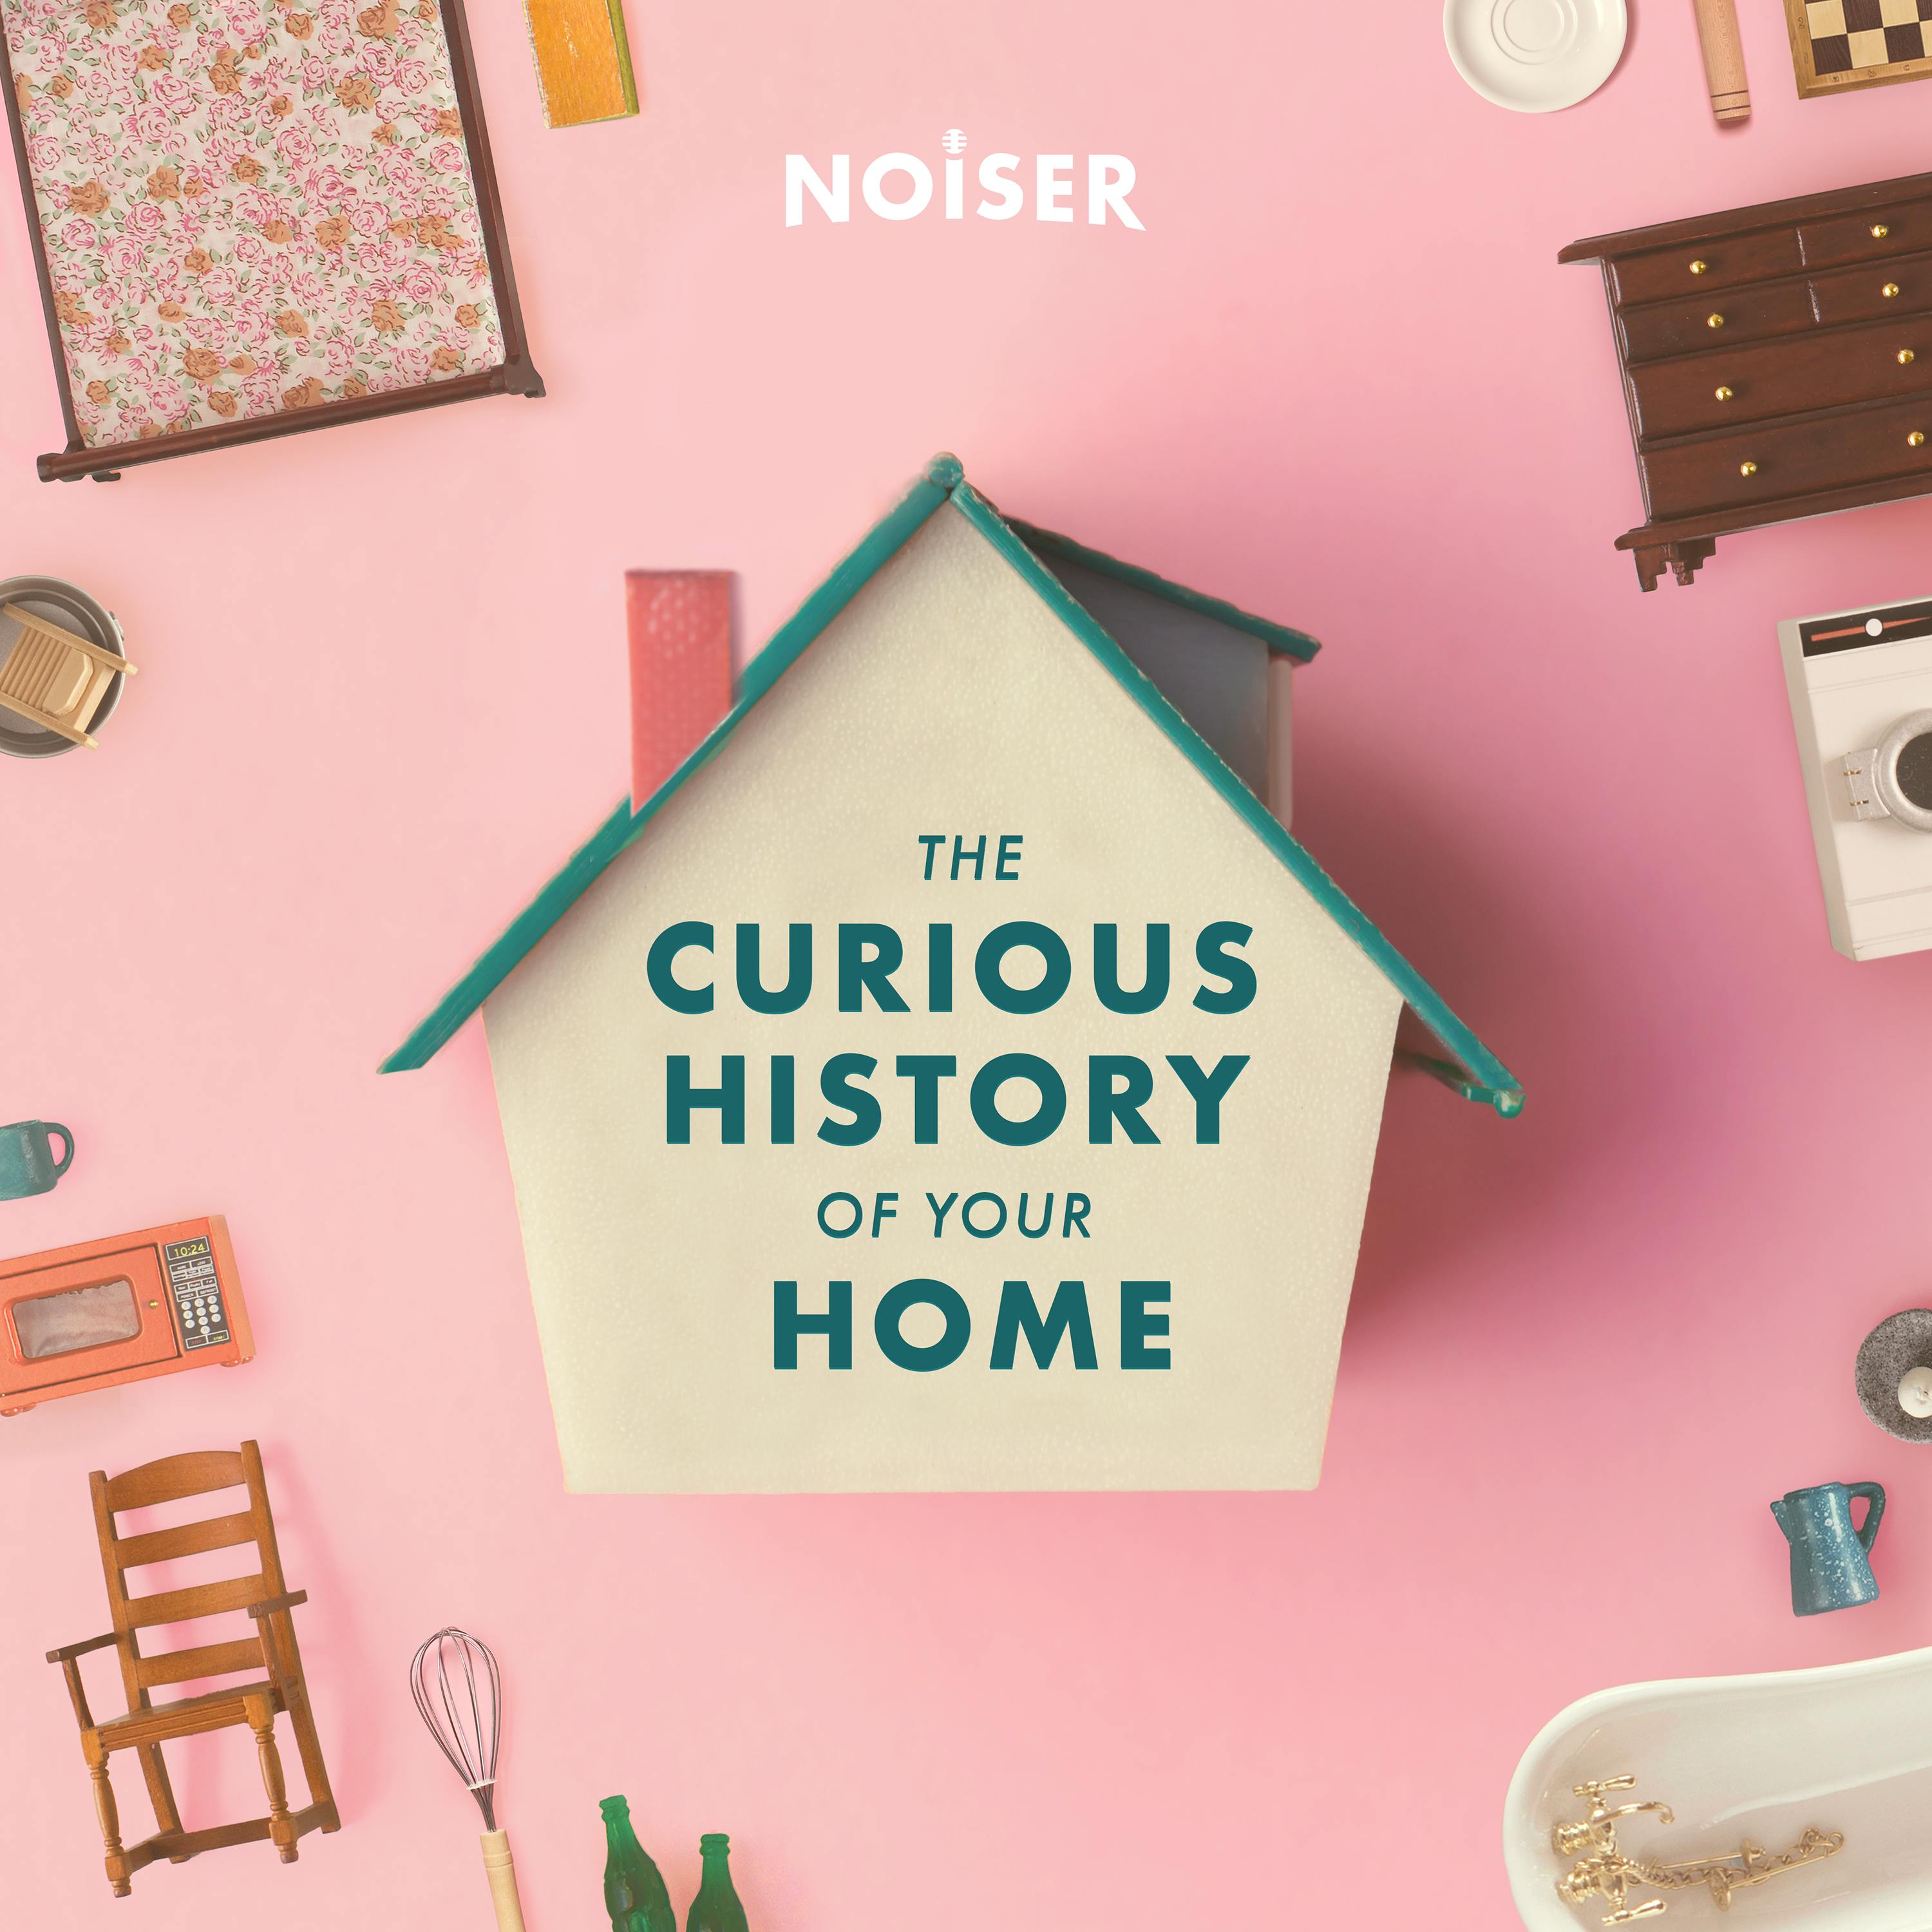 Introducing: The Curious History of Your Home - The Fridge